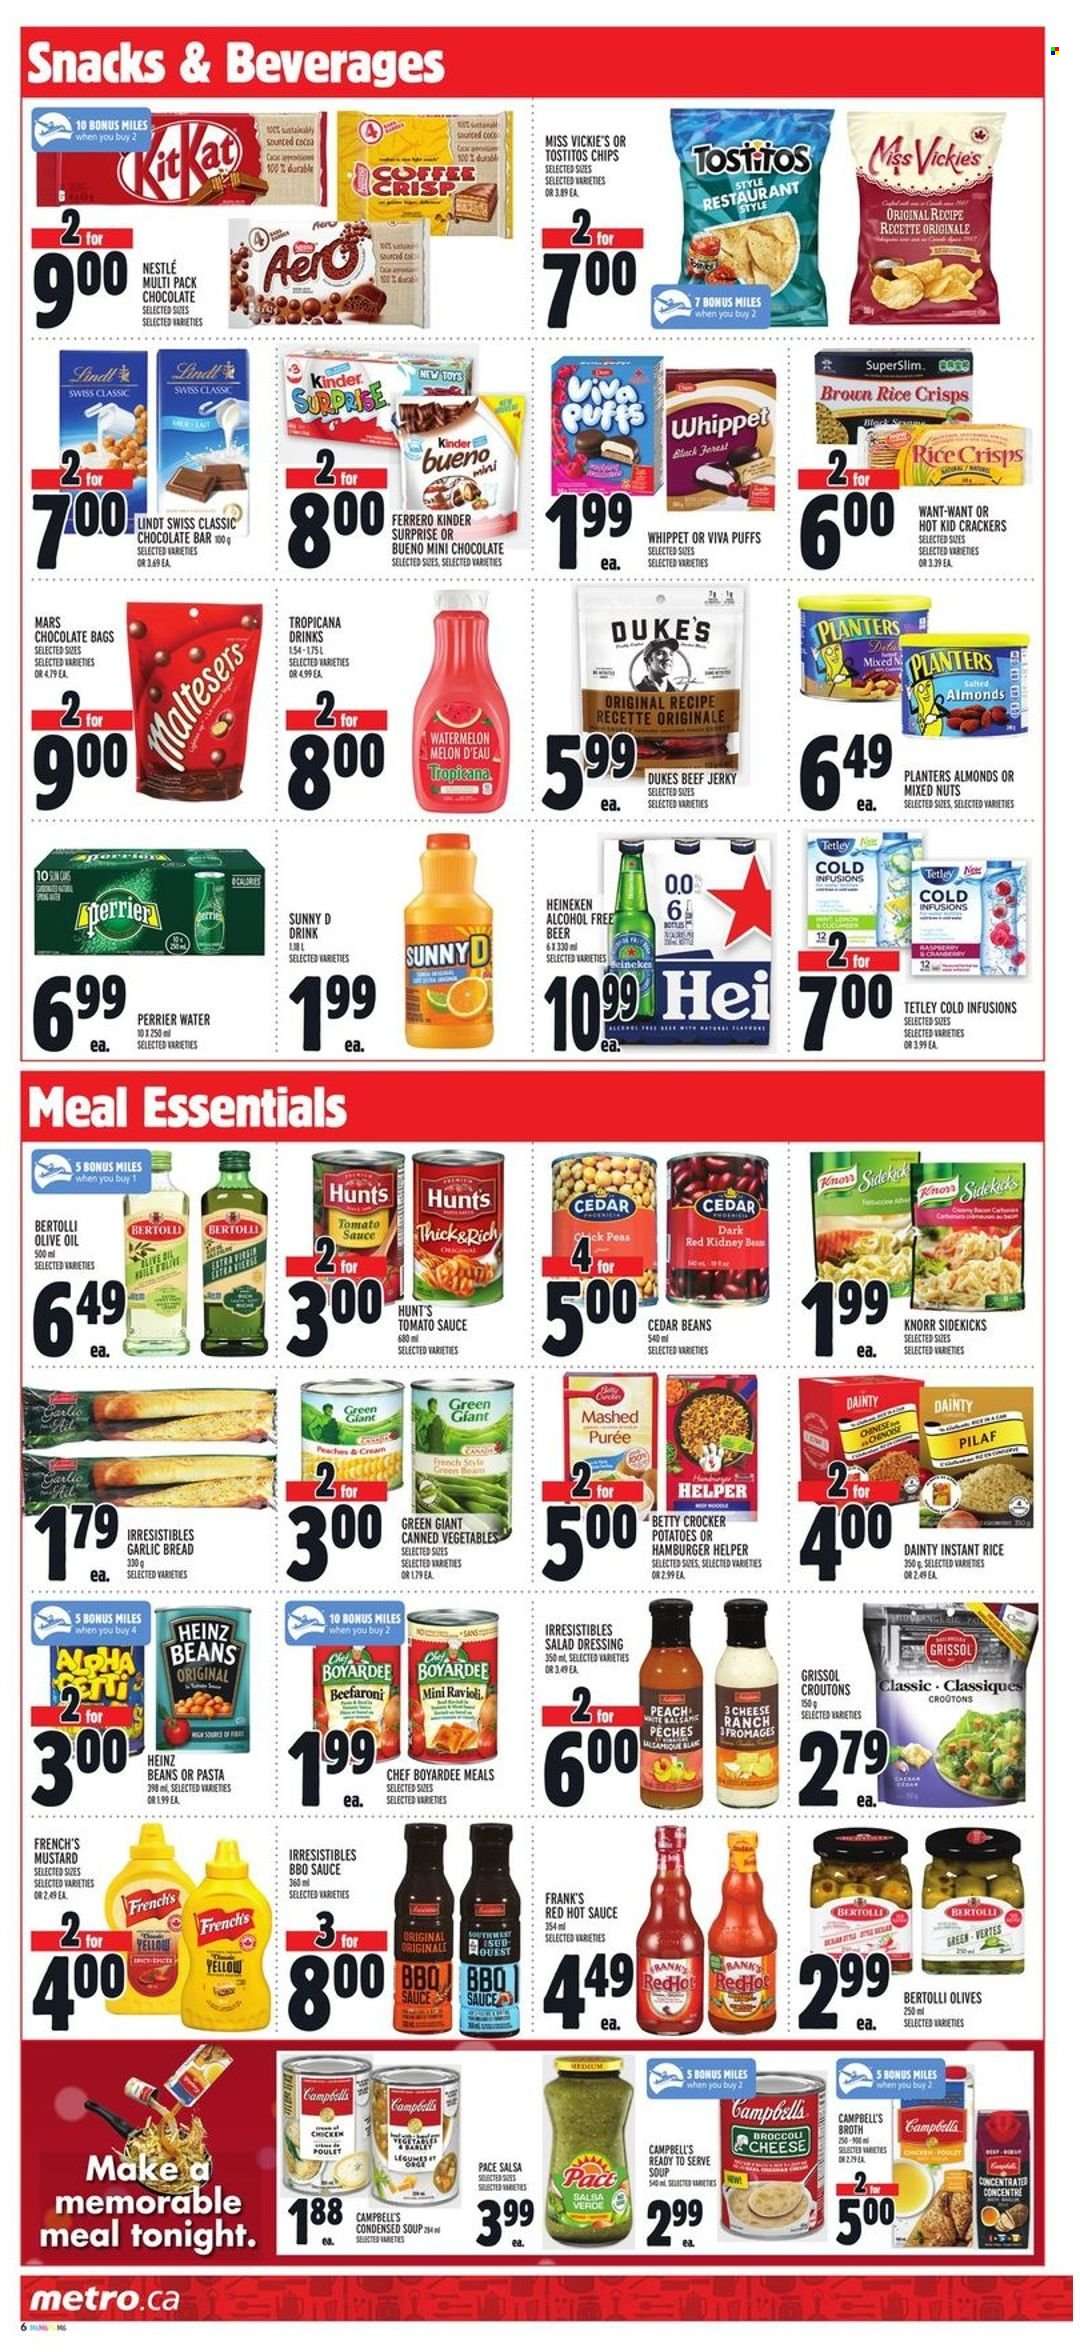 thumbnail - Metro Flyer - January 13, 2022 - January 19, 2022 - Sales products - bread, puffs, beans, potatoes, watermelon, melons, Campbell's, ravioli, condensed soup, soup, sauce, instant soup, Bertolli, beef jerky, jerky, snack, Kinder Surprise, Mars, crackers, Kinder Bueno, chocolate bar, Tostitos, rice crisps, croutons, broth, tomato sauce, canned vegetables, Chef Boyardee, brown rice, rice, BBQ sauce, mustard, salad dressing, hot sauce, dressing, salsa, olive oil, oil, almonds, mixed nuts, Planters, Perrier, beer, Heineken, Knorr, Nestlé, Heinz, olives, chips, Lindt, Ferrero Rocher. Page 8.